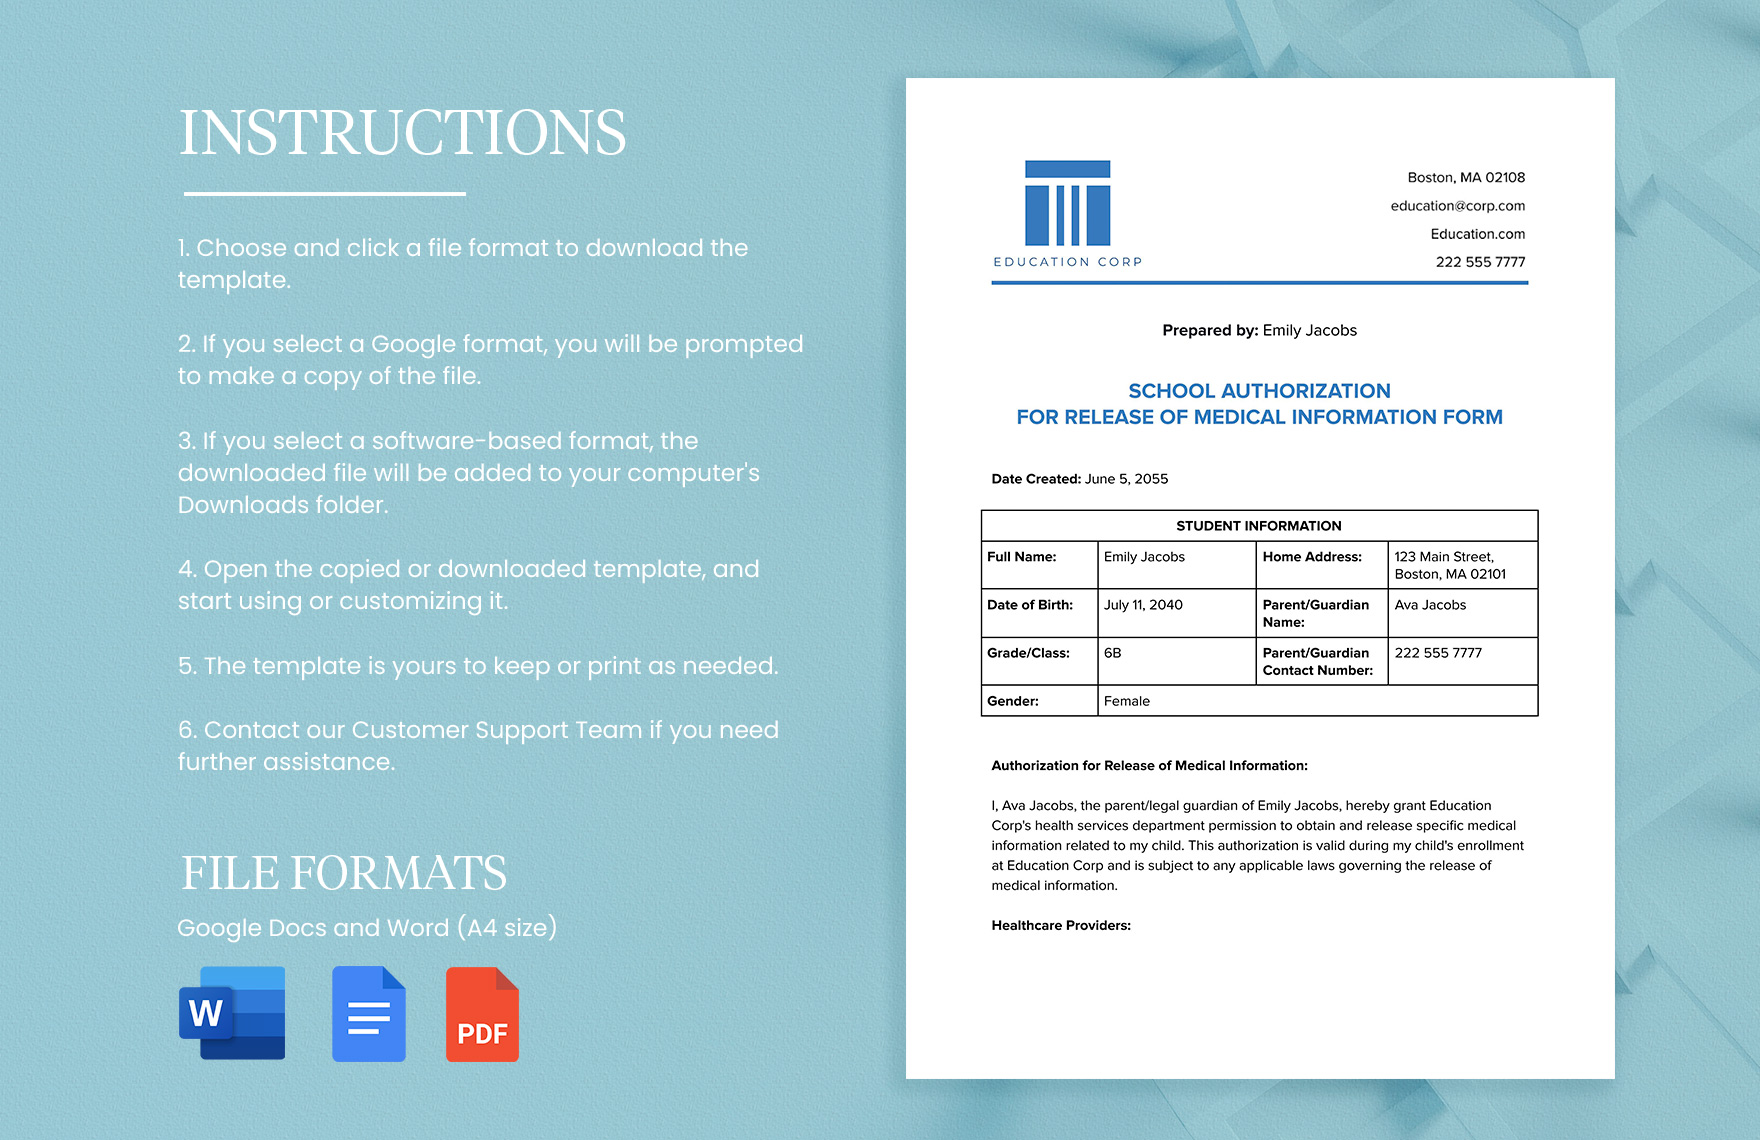 School Authorization for Release of Medical Information Form Template